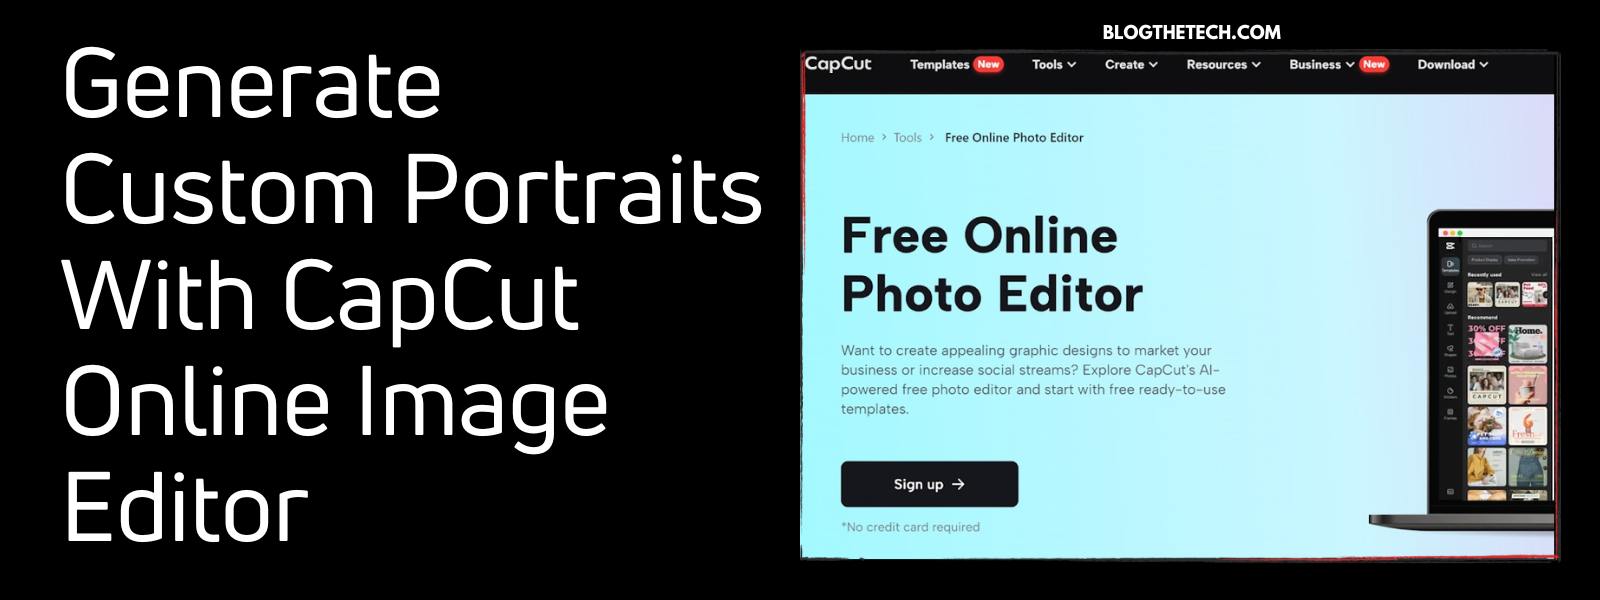 portraits-with-capcut-online-image-editor-featured